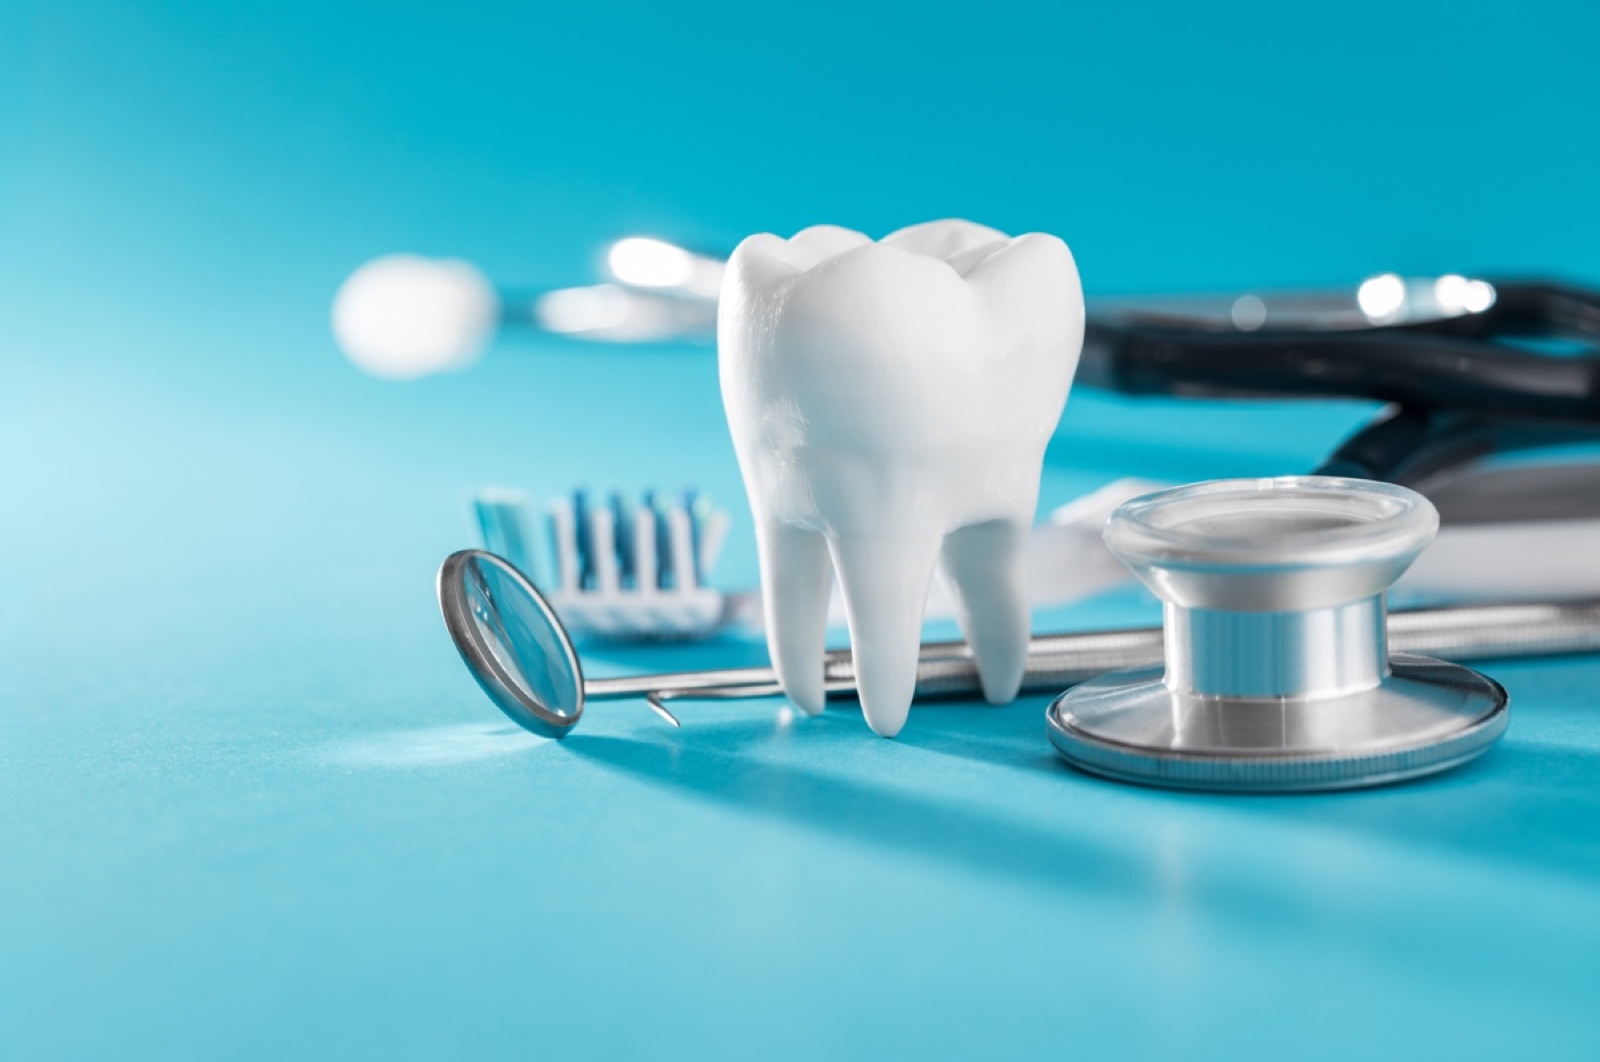 Dental equipment and tools for holistic dentistry